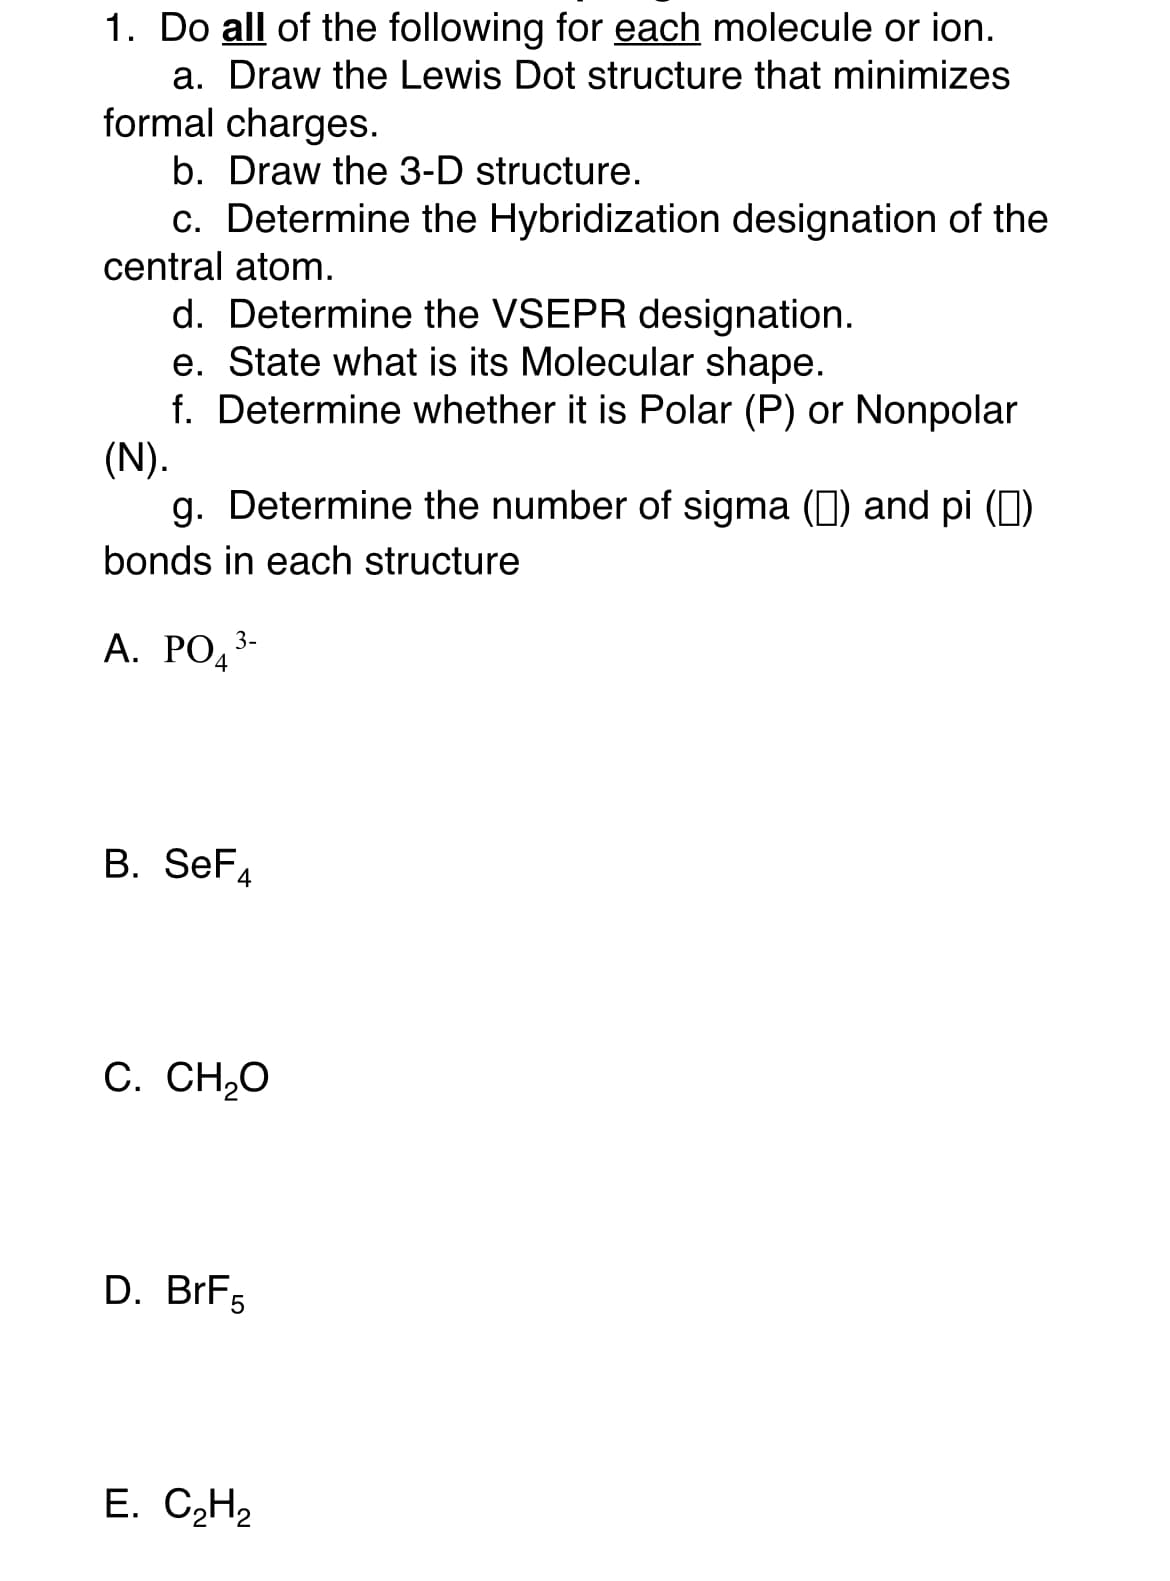 1. Do all of the following for each molecule or ion.
a. Draw the Lewis Dot structure that minimizes
formal charges.
b. Draw the 3-D structure.
c. Determine the Hybridization designation of the
central atom.
d. Determine the VSEPR designation.
e. State what is its Molecular shape.
f. Determine whether it is Polar (P) or Nonpolar
(N).
g. Determine the number of sigma (0) and pi (0)
bonds in each structure
А. РОд
3-
B. SeF4
C. CH,O
D. BrF5
Е. СН2
